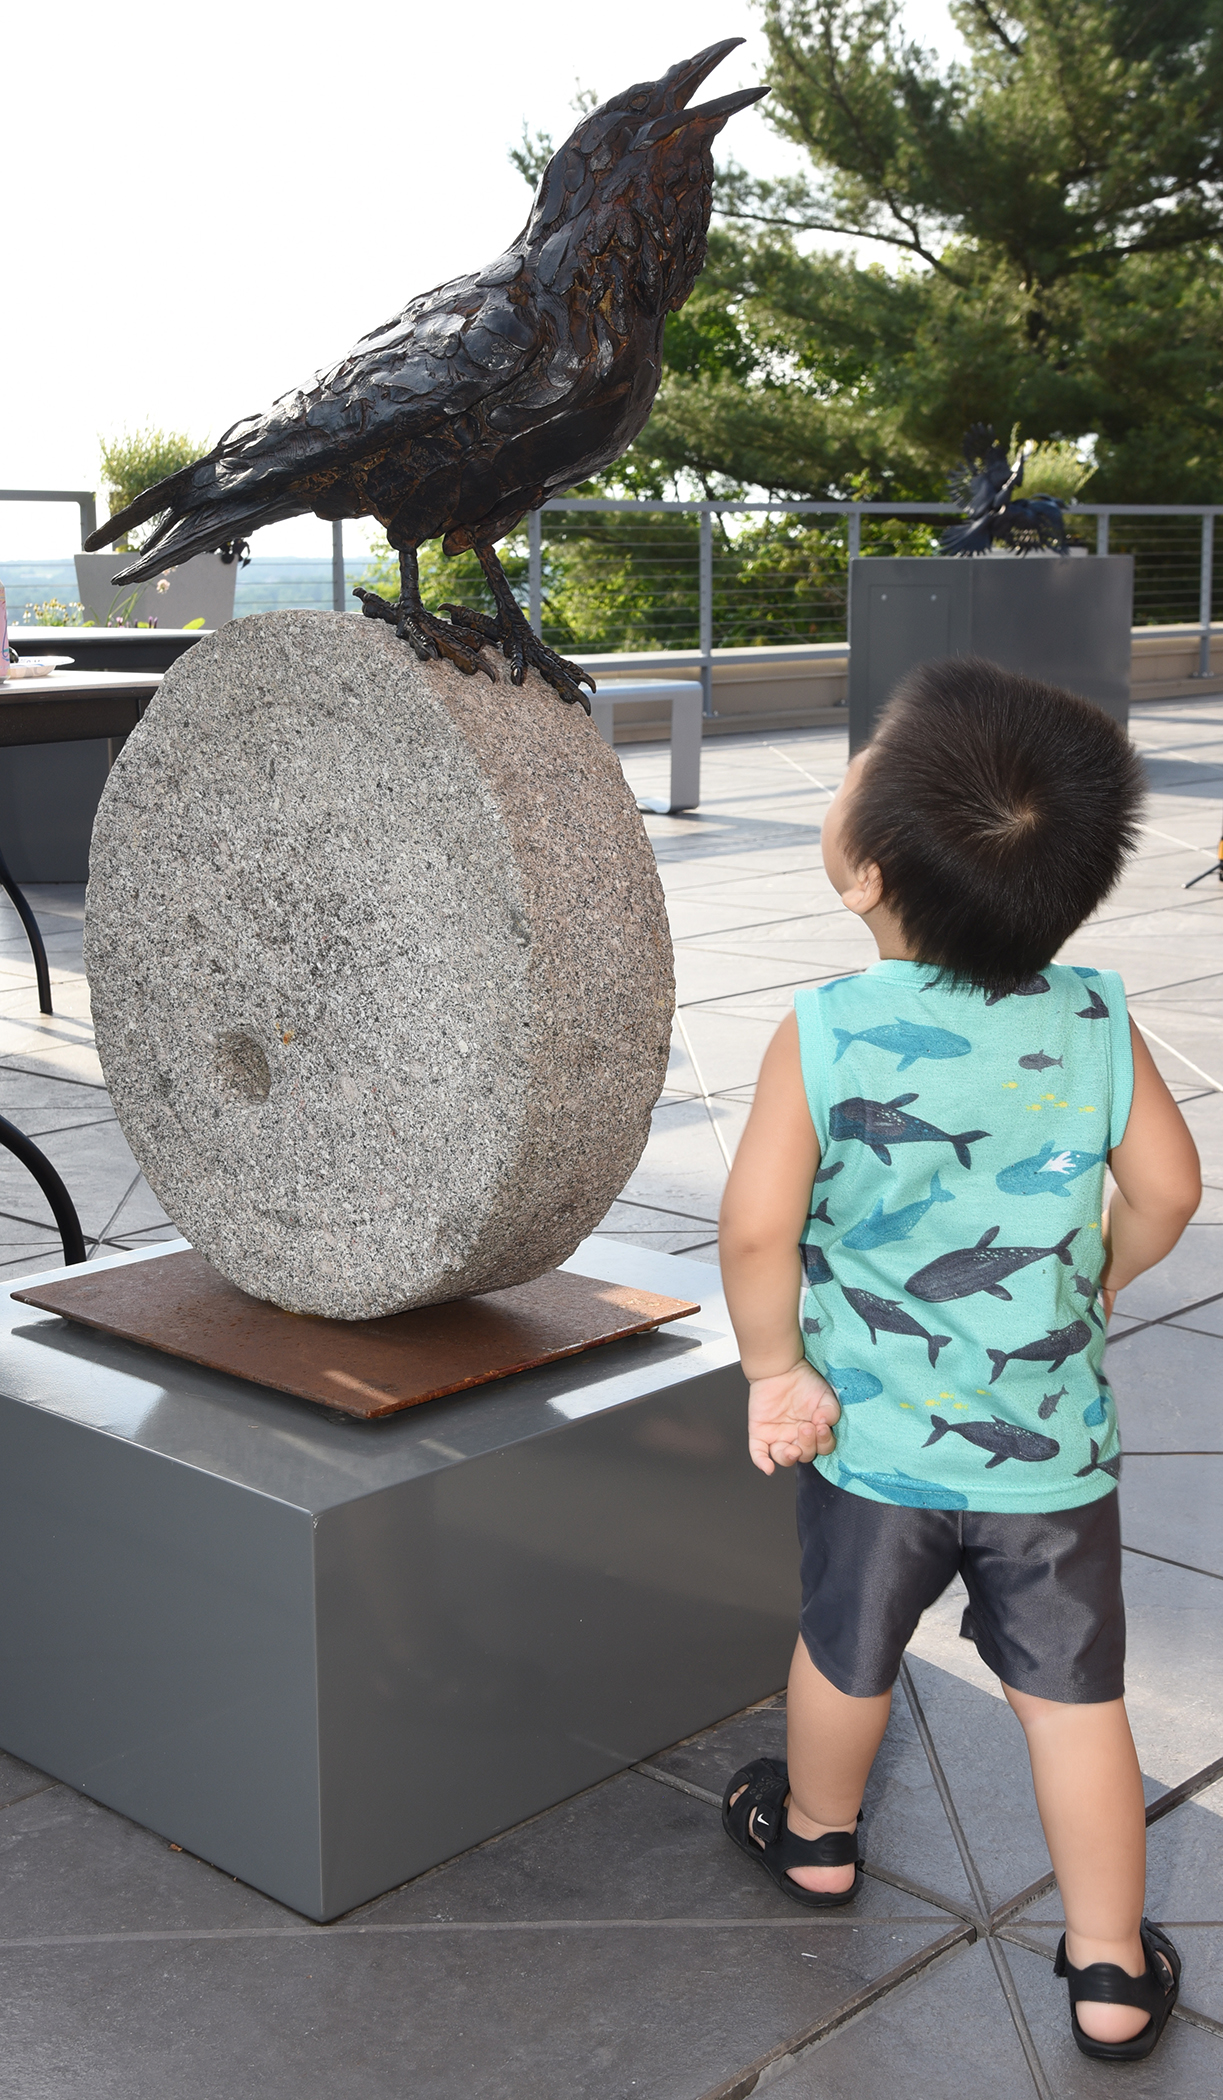 A young boy looks upward at a large raven sculpture in the museum's Rooftop Sculpture Garden